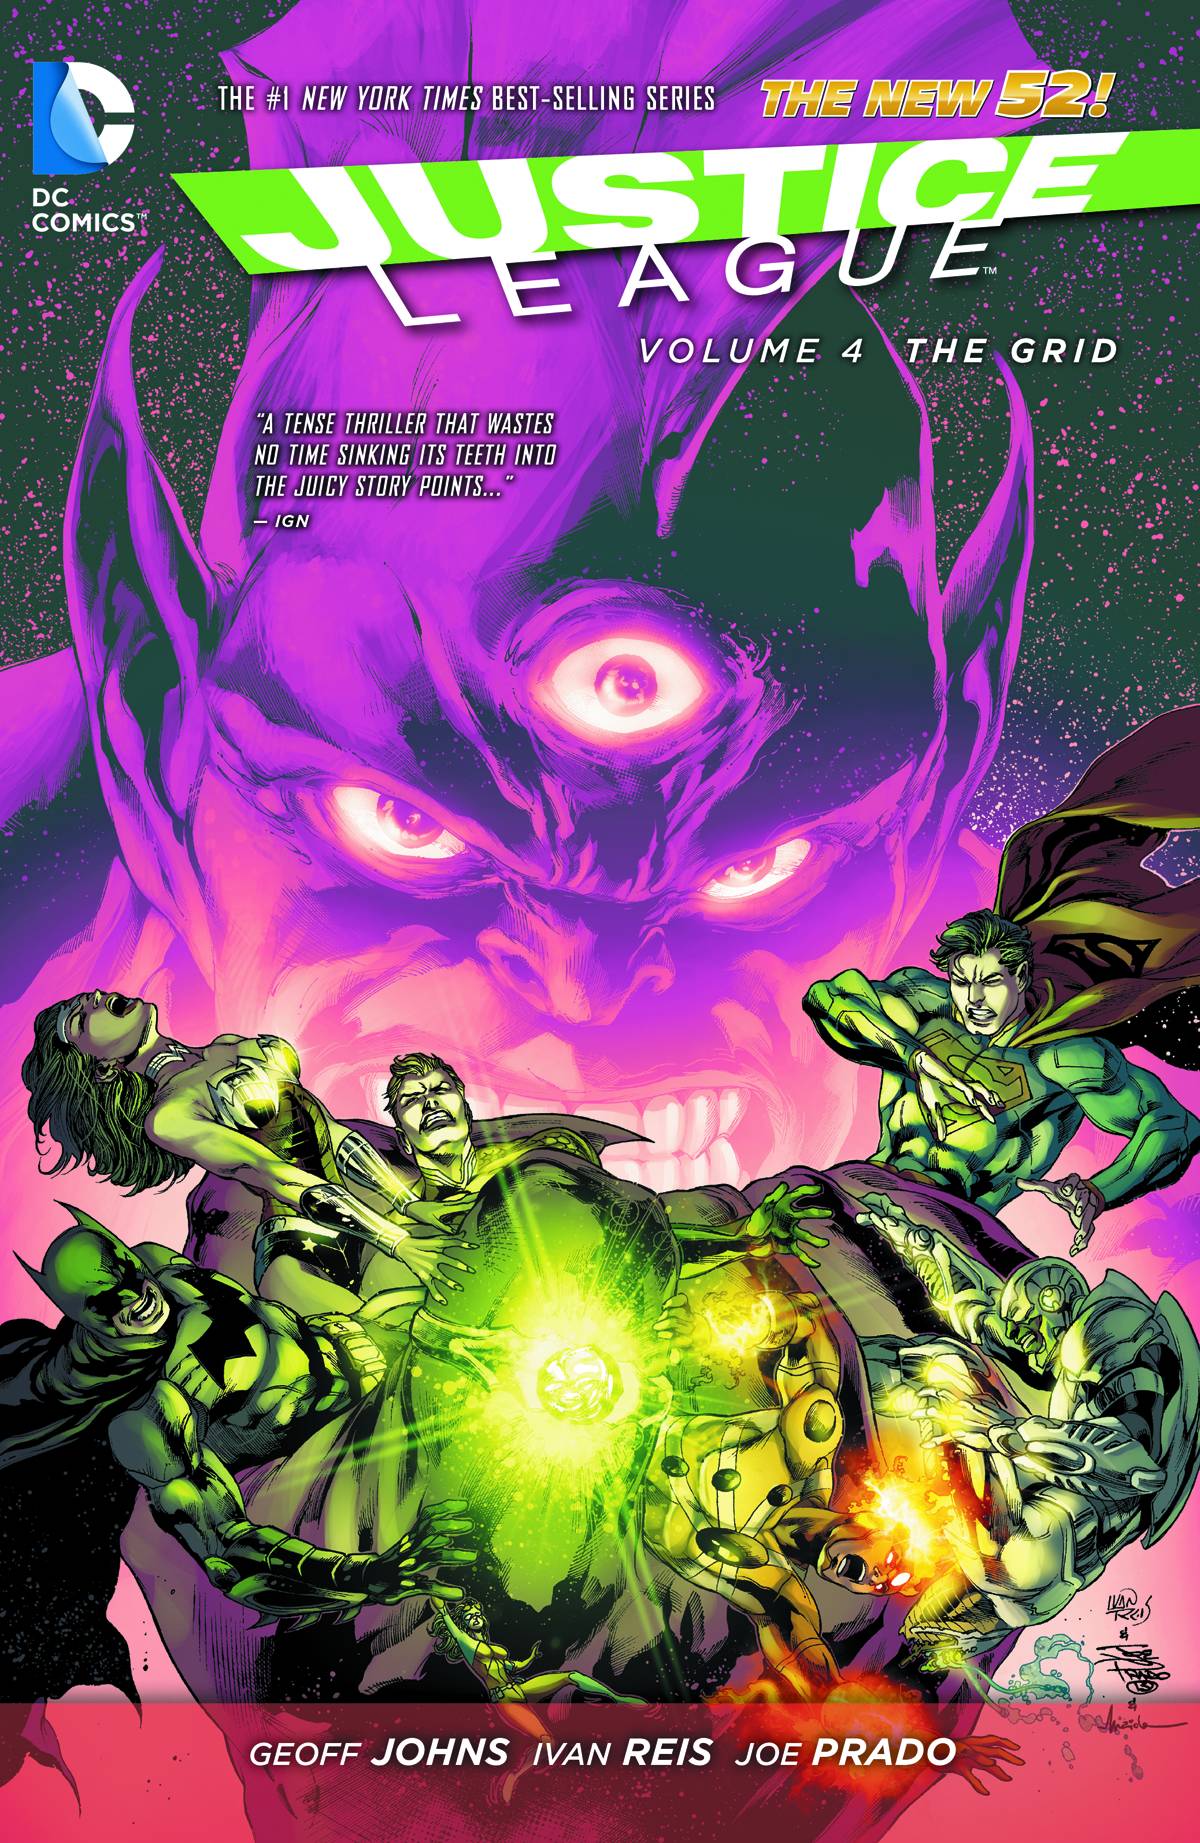 JUSTICE LEAGUE (New 52) VOL 04: THE GRID